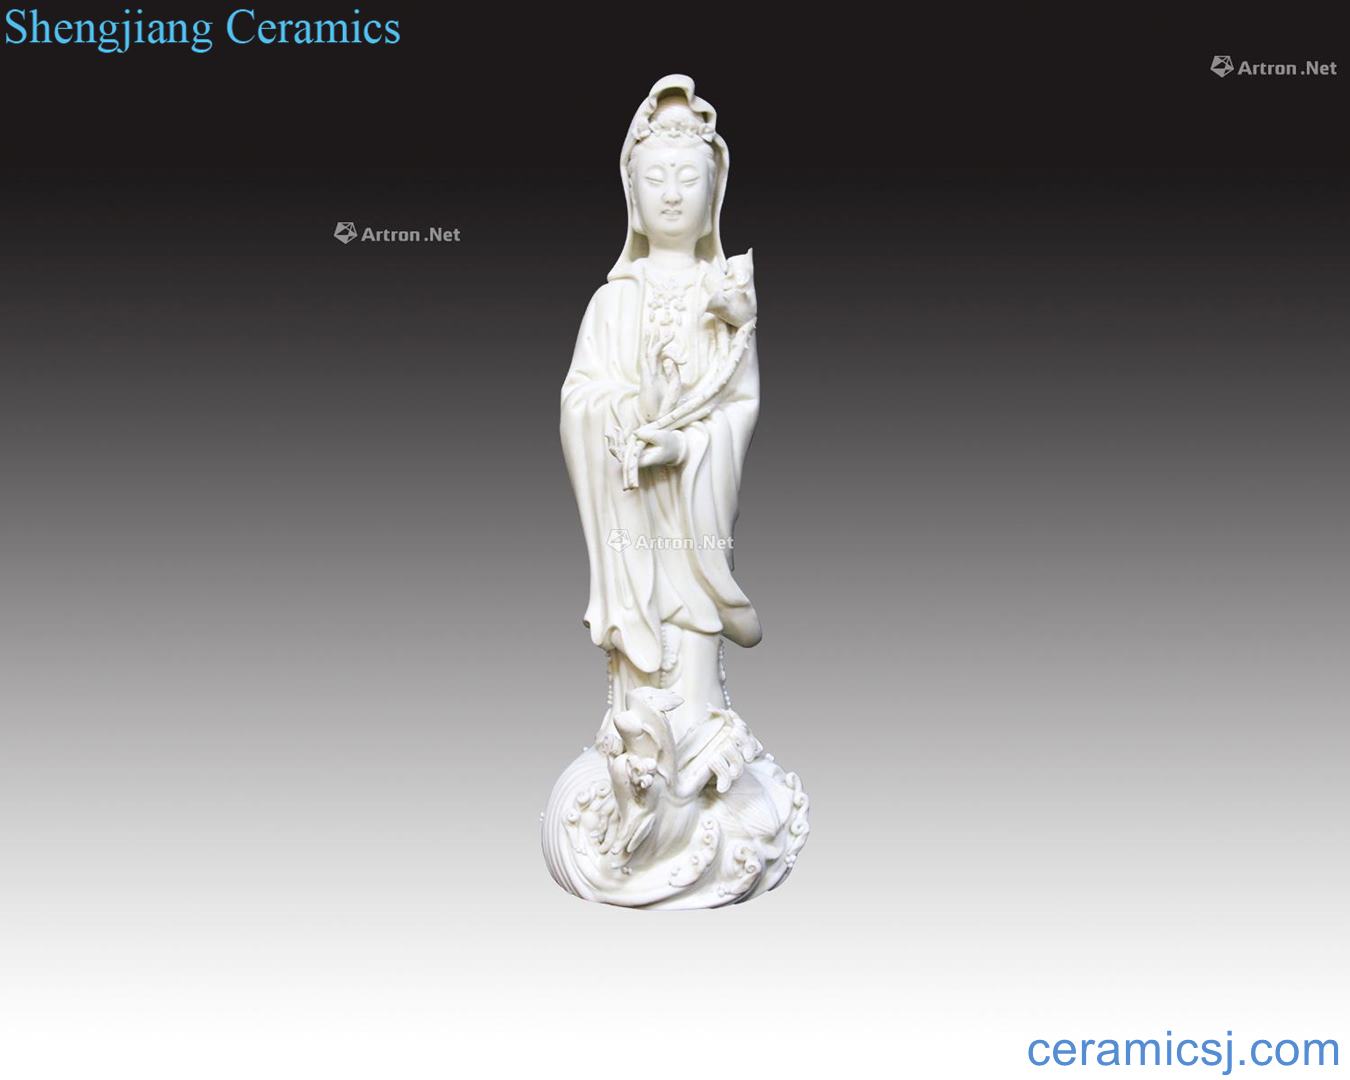 In the Ming dynasty Dehua guanyin stands resemble He Chaozong model